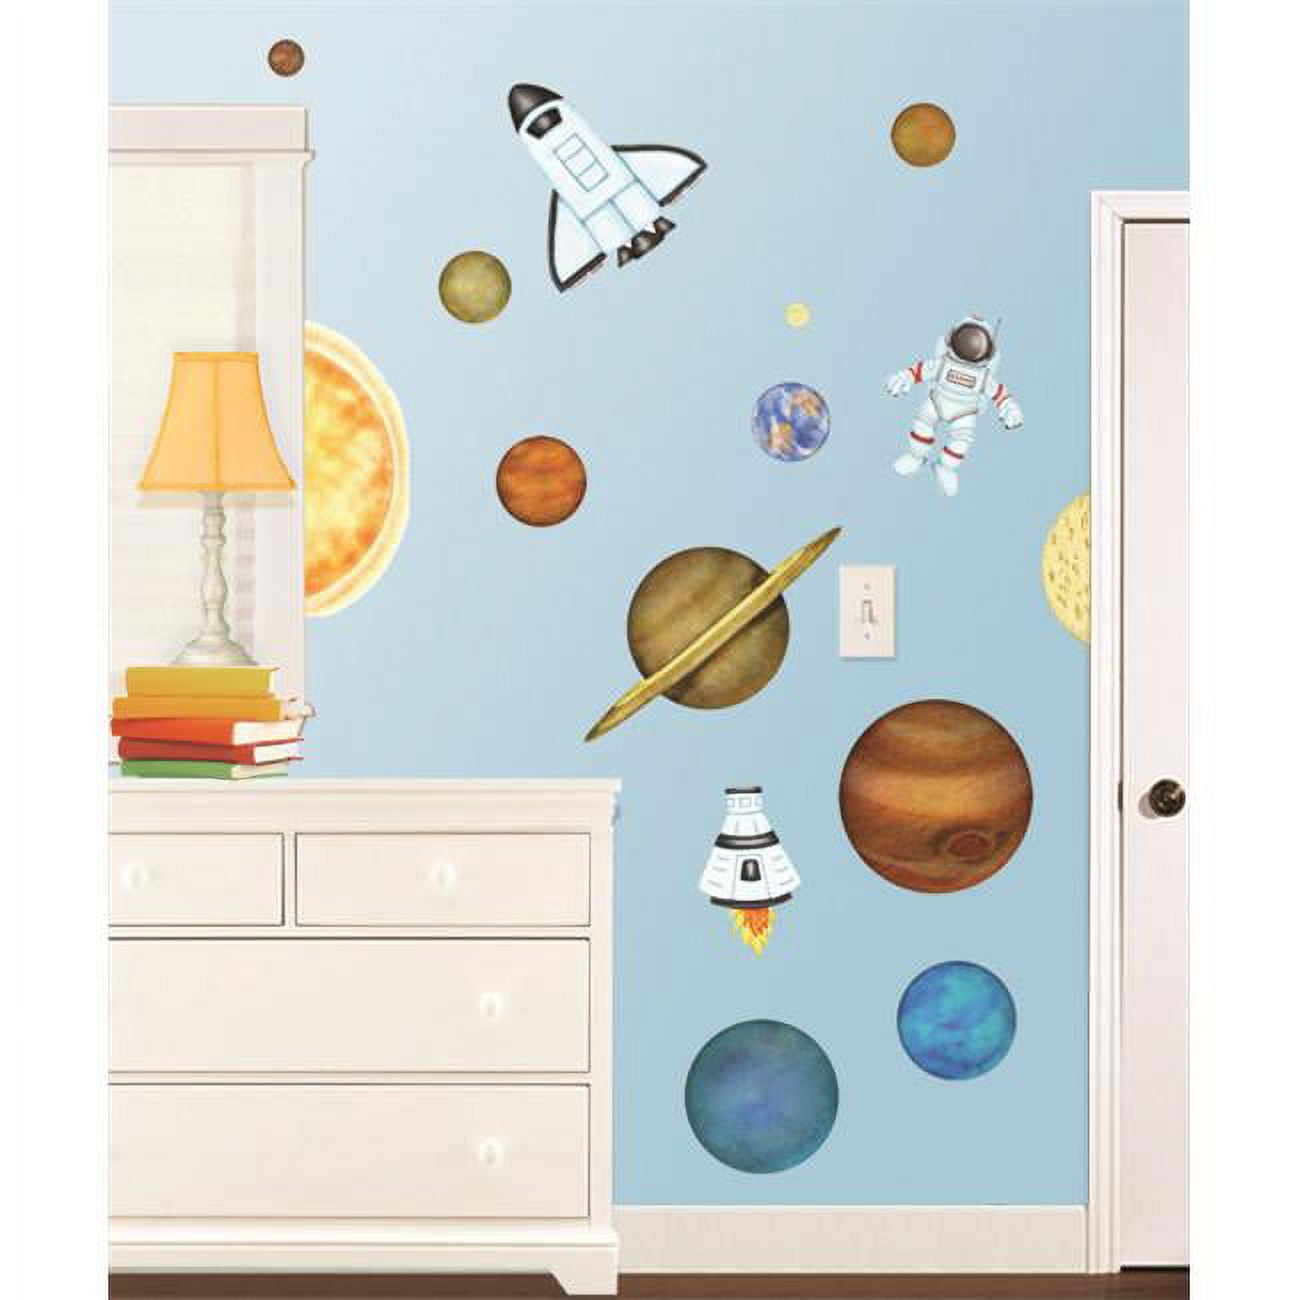 10012 In Outer Space Super Jumbo Applique